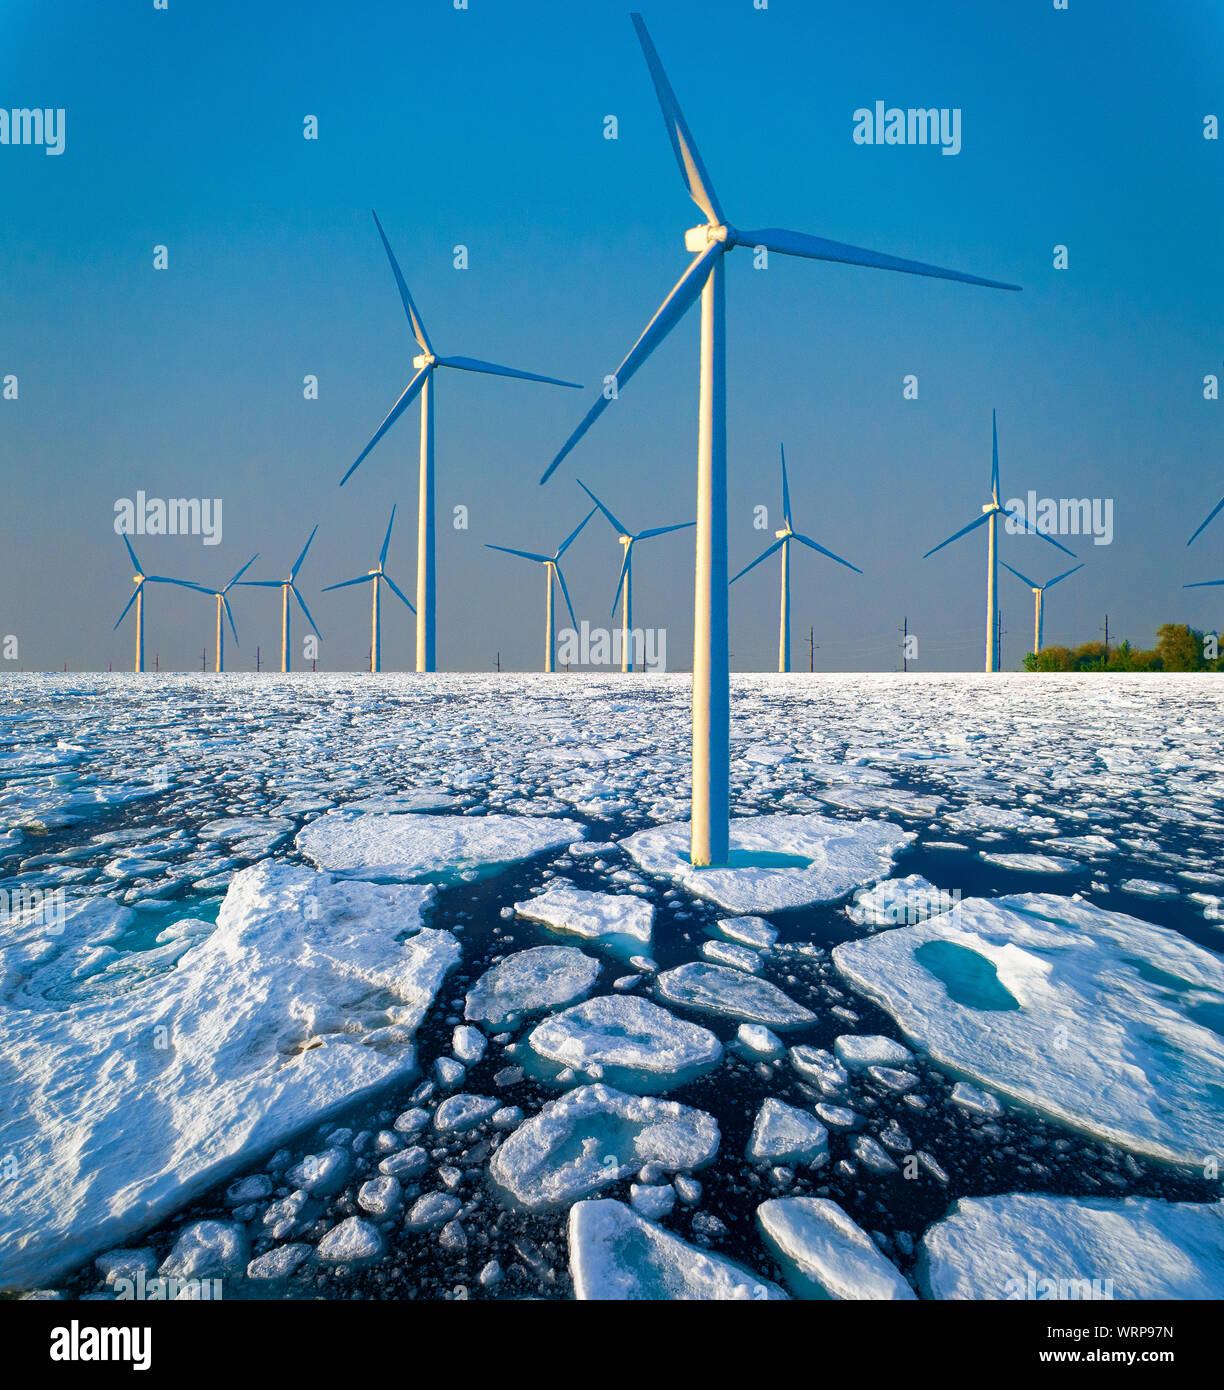 Digitally manipulated image of a turbine on a cracked ice surface Stock Photo - Alamy